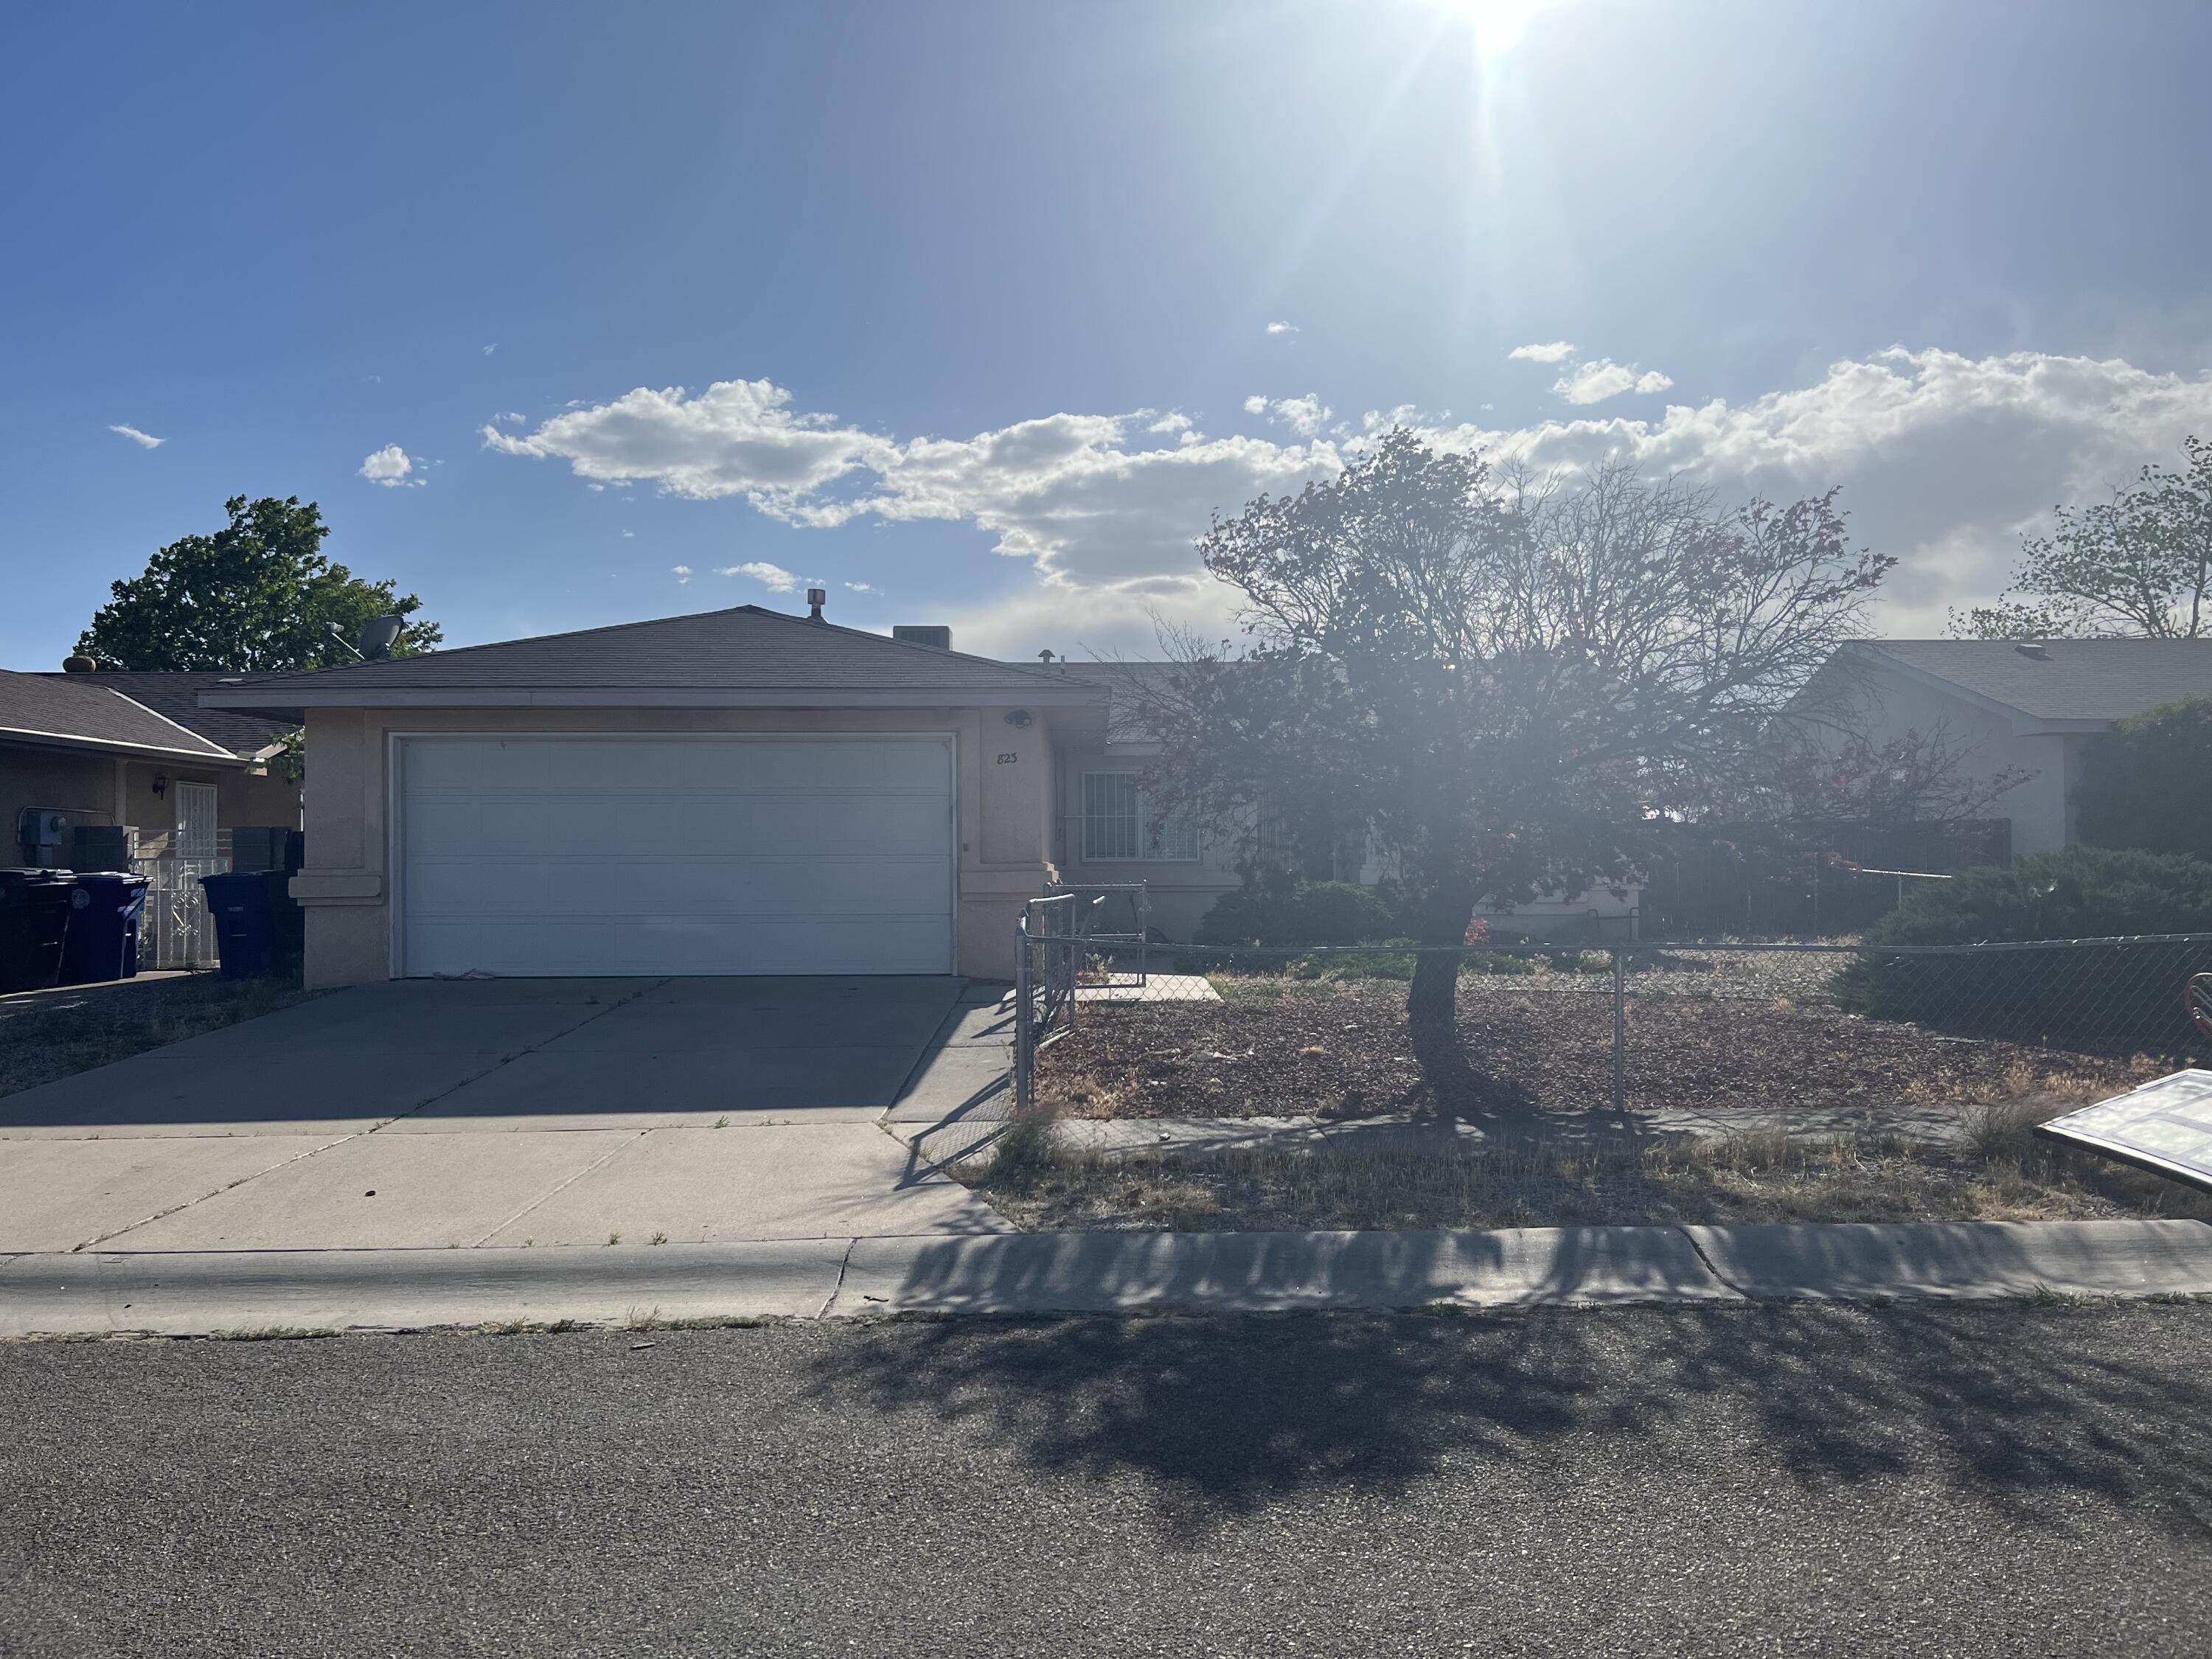 CALLING INVESTORS! Cash ONLY deal with a longterm tenant that stays! Priced WAY under market value. This home is not available for showings, please do not disturb tenant. Call your favorite realtor for more information!